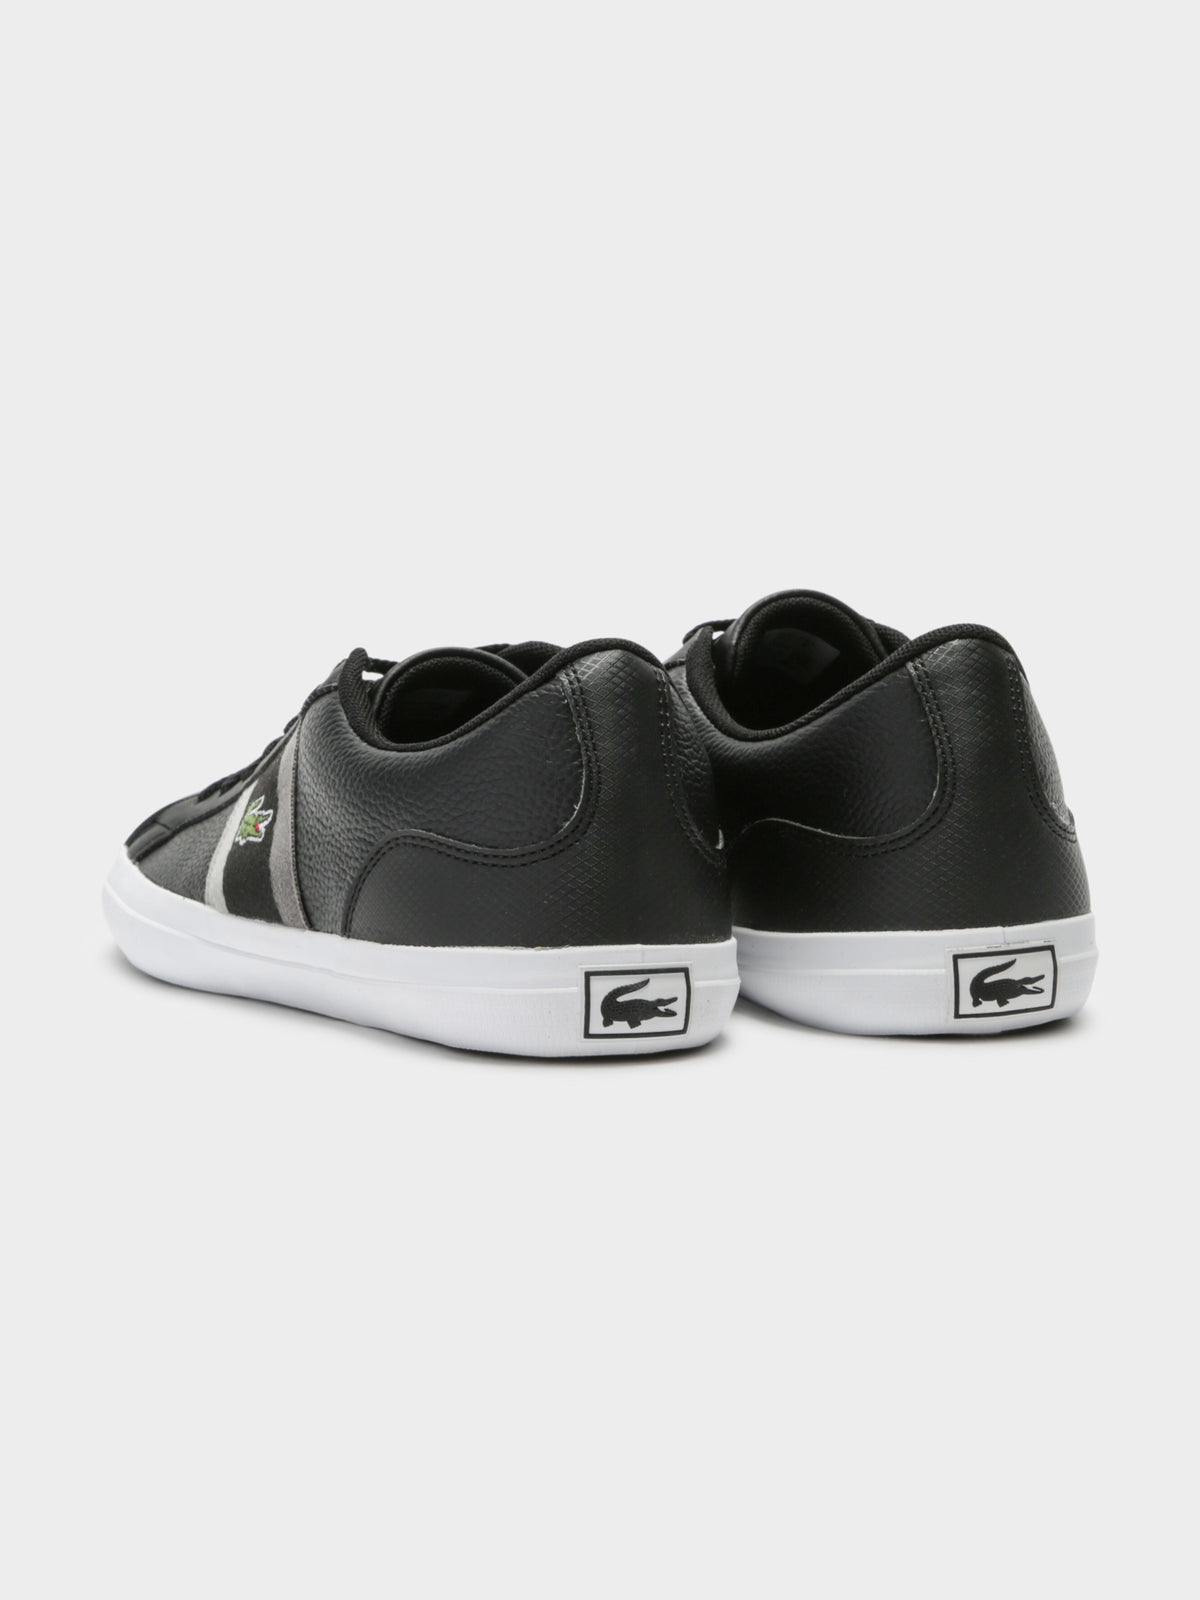 Lenord 119 3 CMA Sneakers in Black and Grey